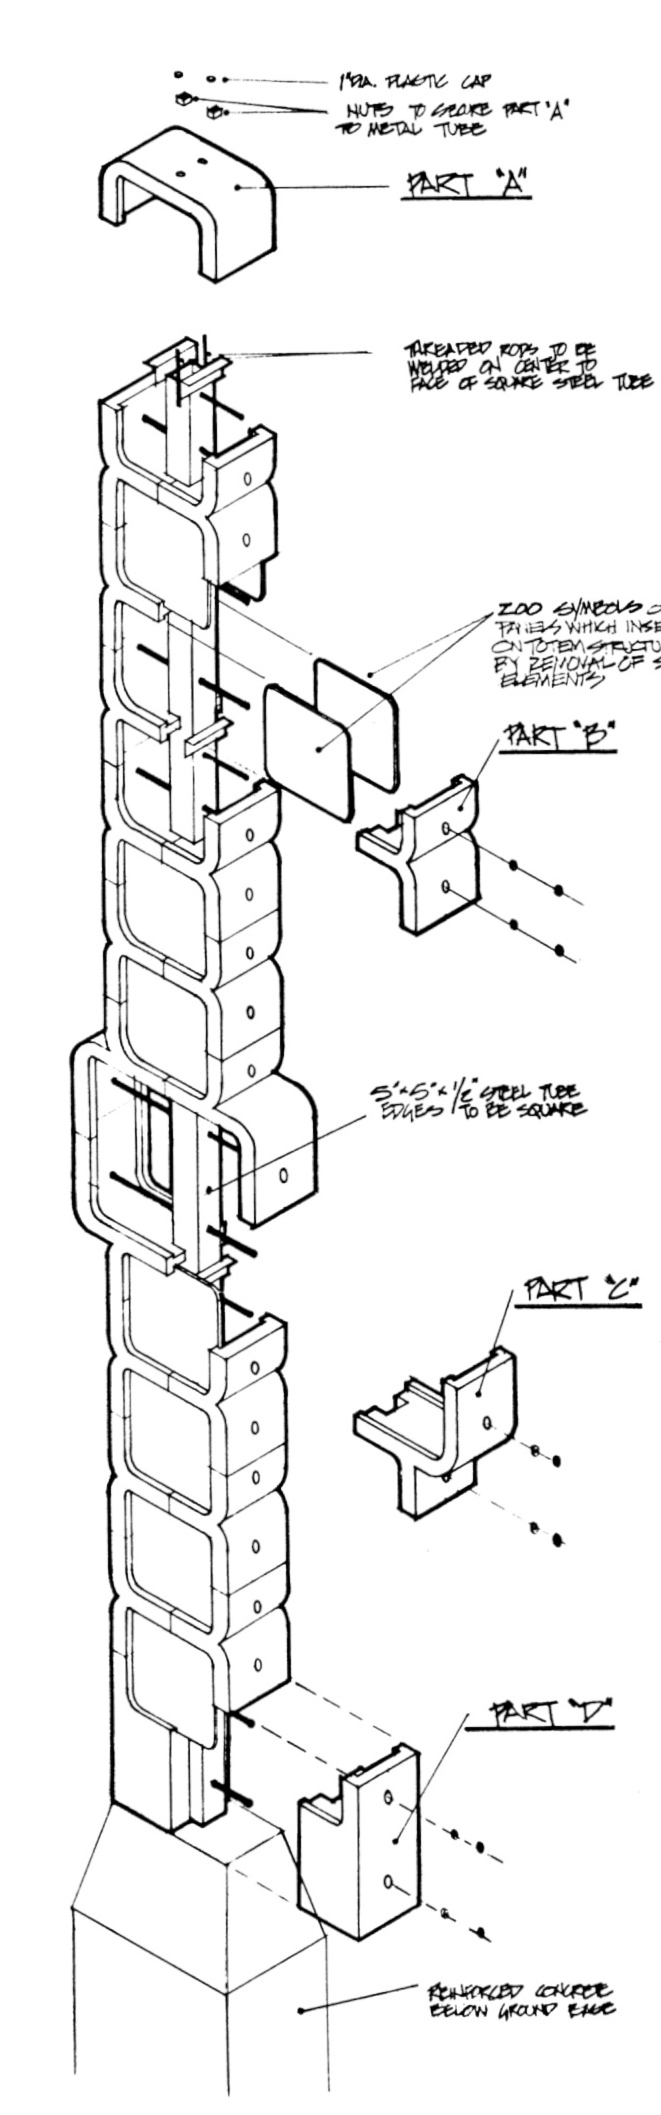 Mechanical drawing of how the totems were to be constructed